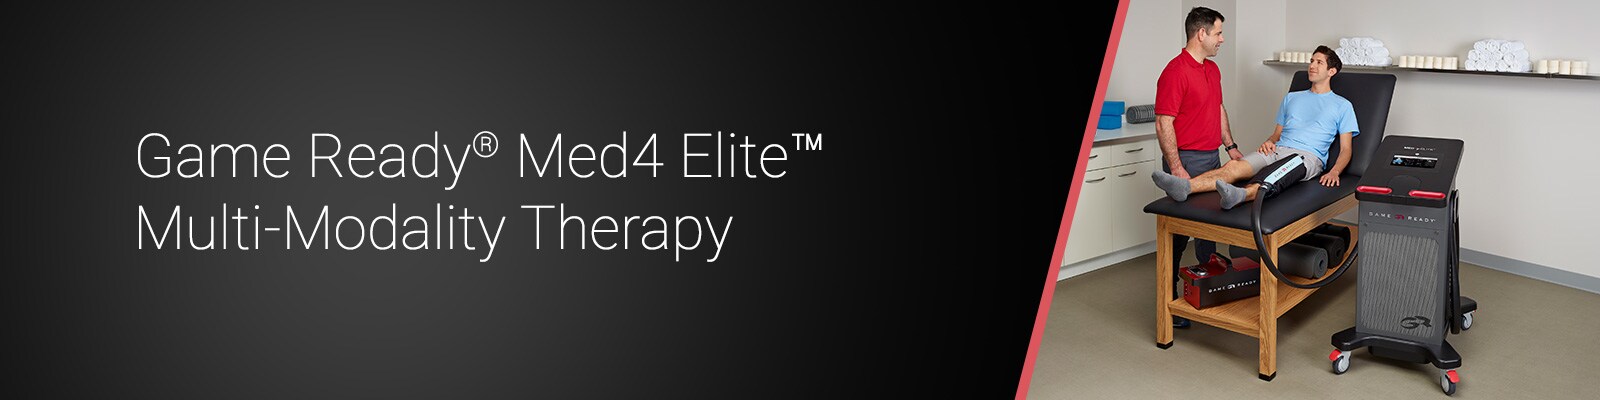 Game Ready® Med4 Elite™ Multi-Modality Therapy Unit – Henry Schein Medical